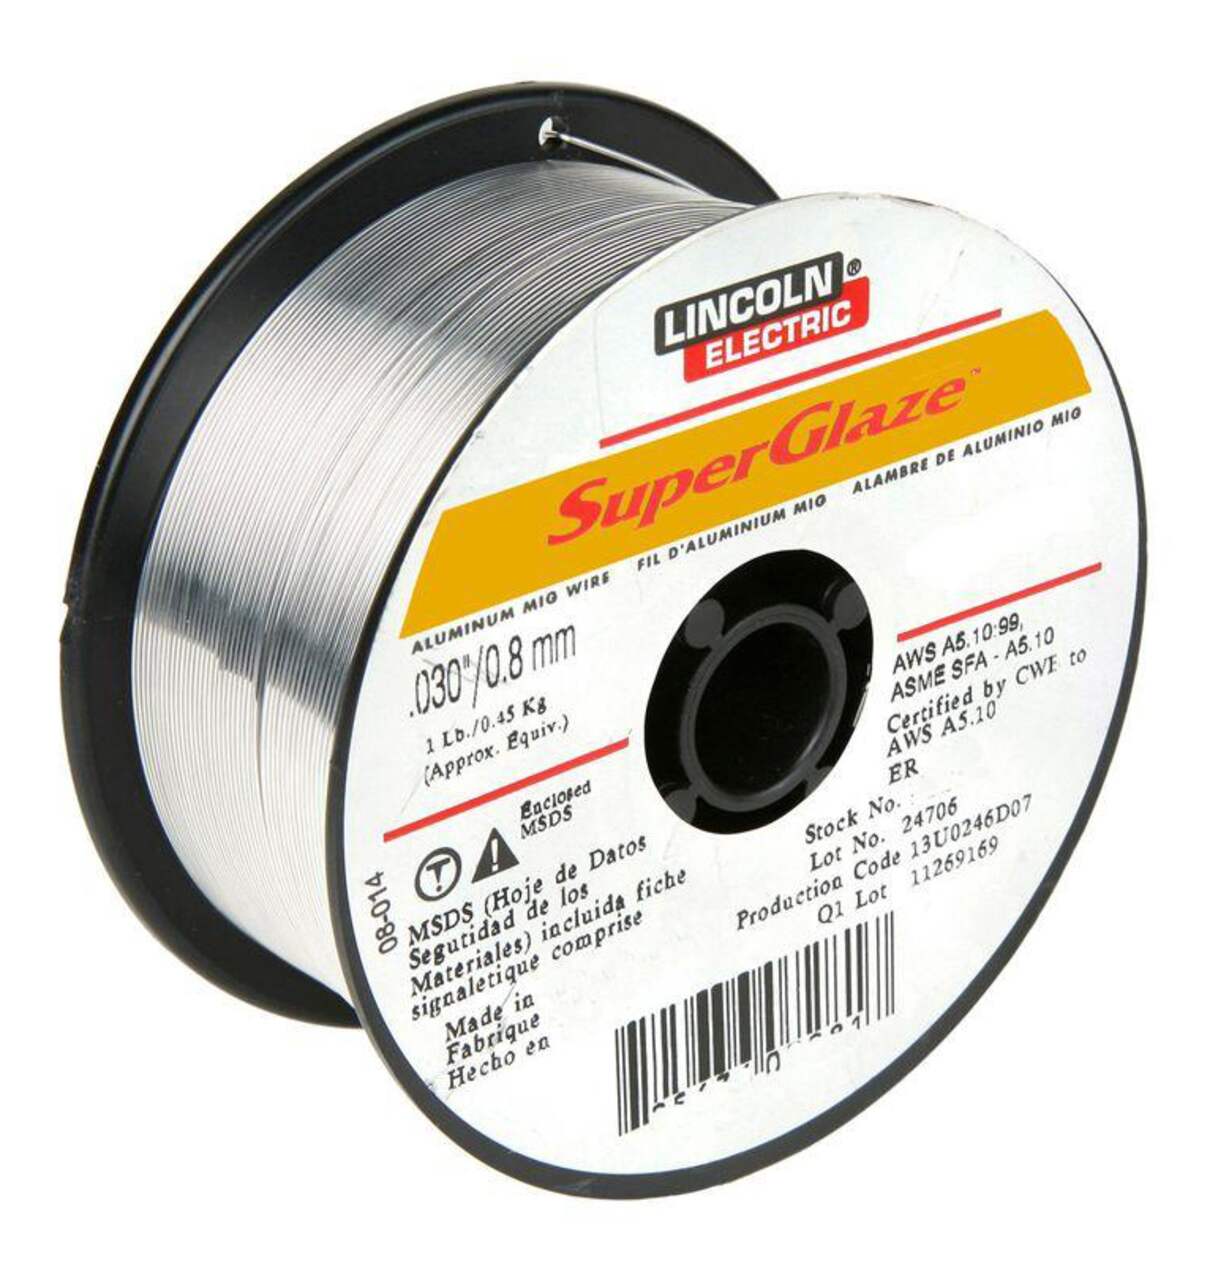 https://media-www.canadiantire.ca/product/fixing/tools/welding-soldering/0585810/-030-4043-aluminum-mig-wire-1lb-spool-89444955-7ae1-437a-8444-f2be77d12c53.png?imdensity=1&imwidth=640&impolicy=mZoom